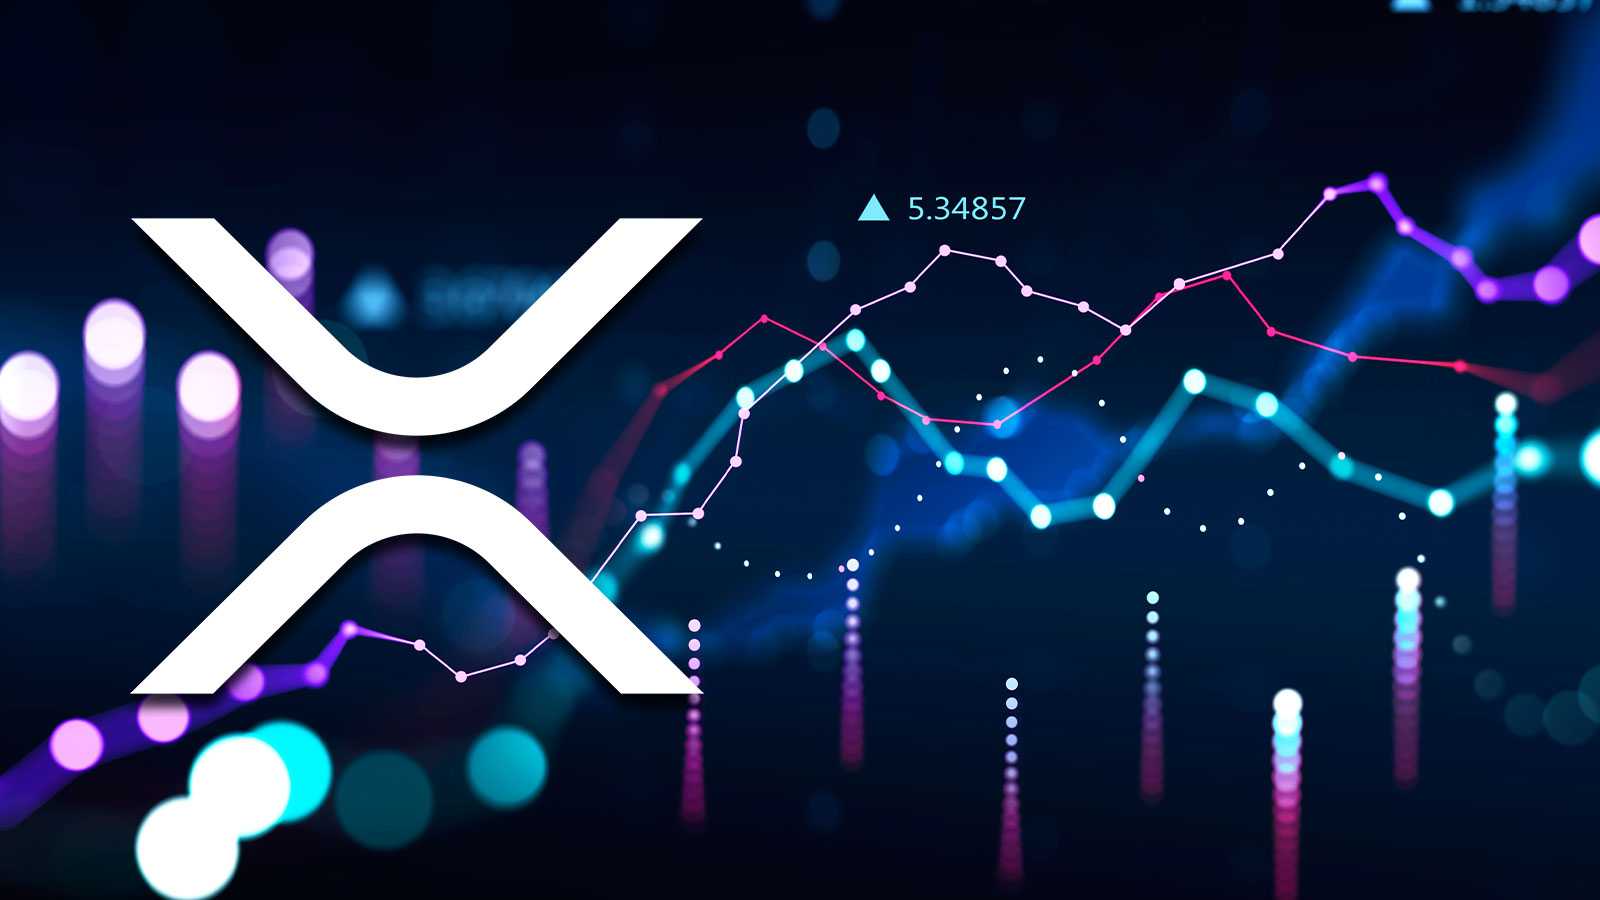 XRP Price Up 12.3% From Monday As Major News Are Expected